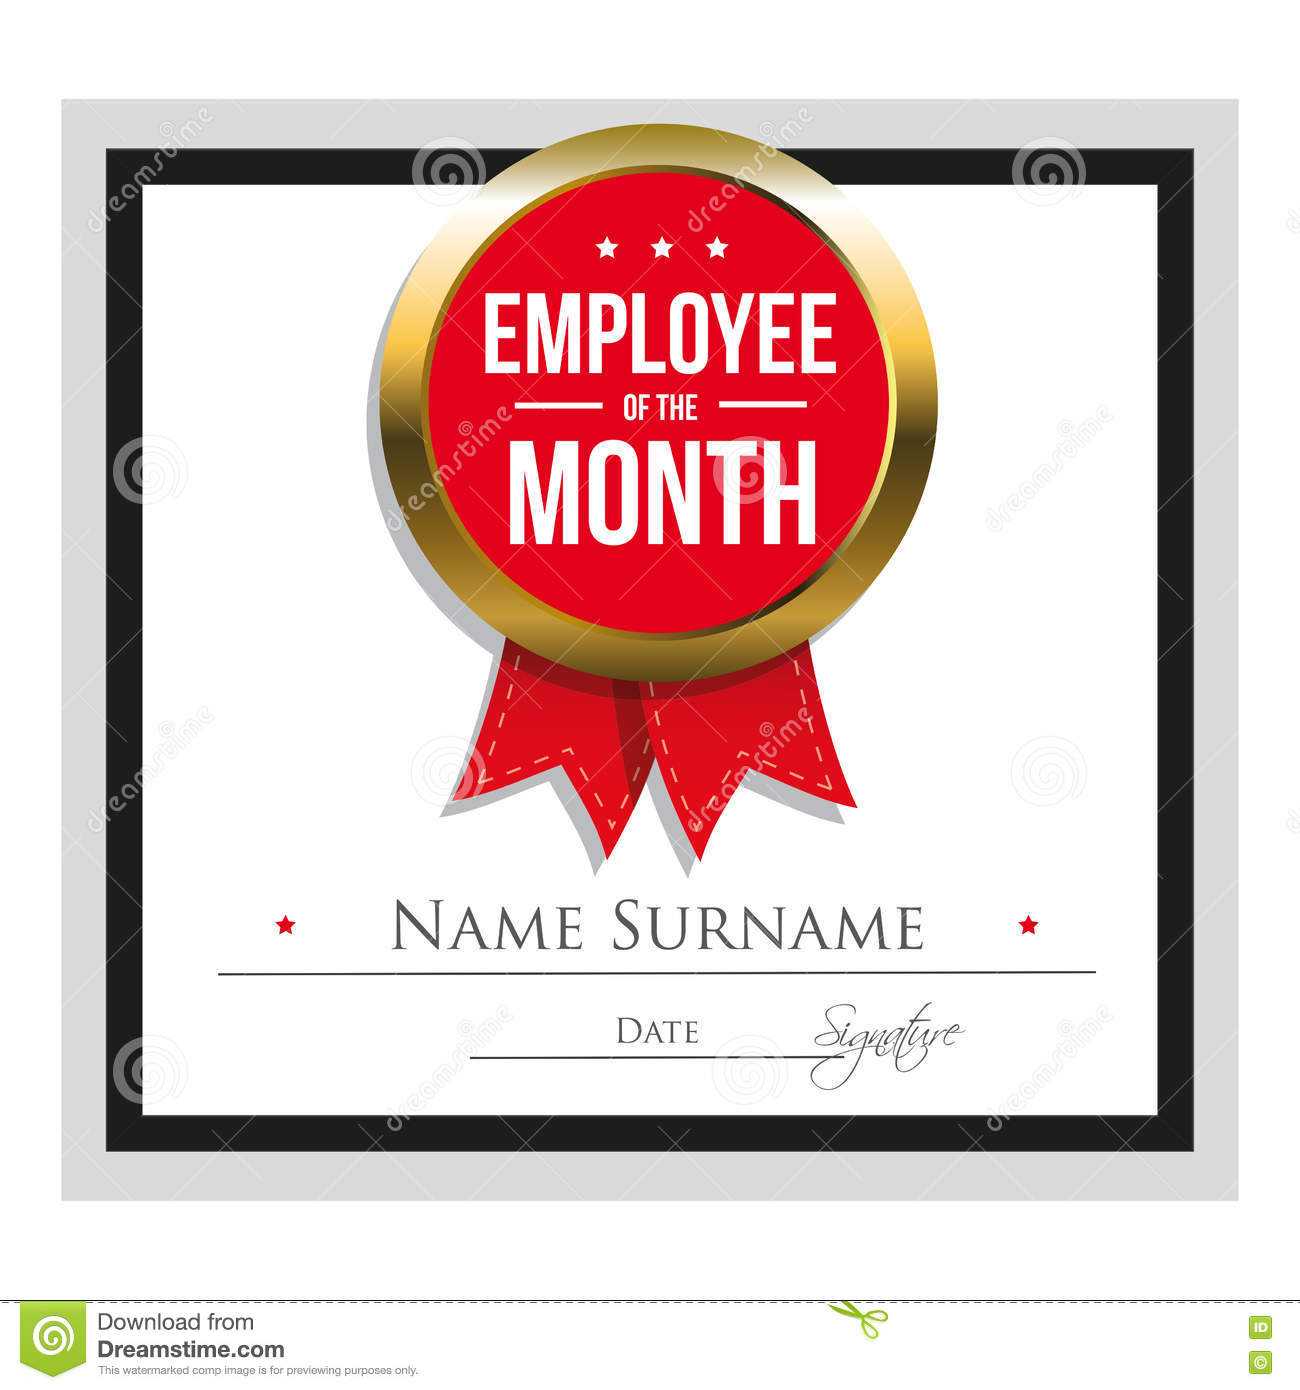 Employee Of The Month Certificate Template Stock Vector Throughout Best Employee Award Certificate Templates